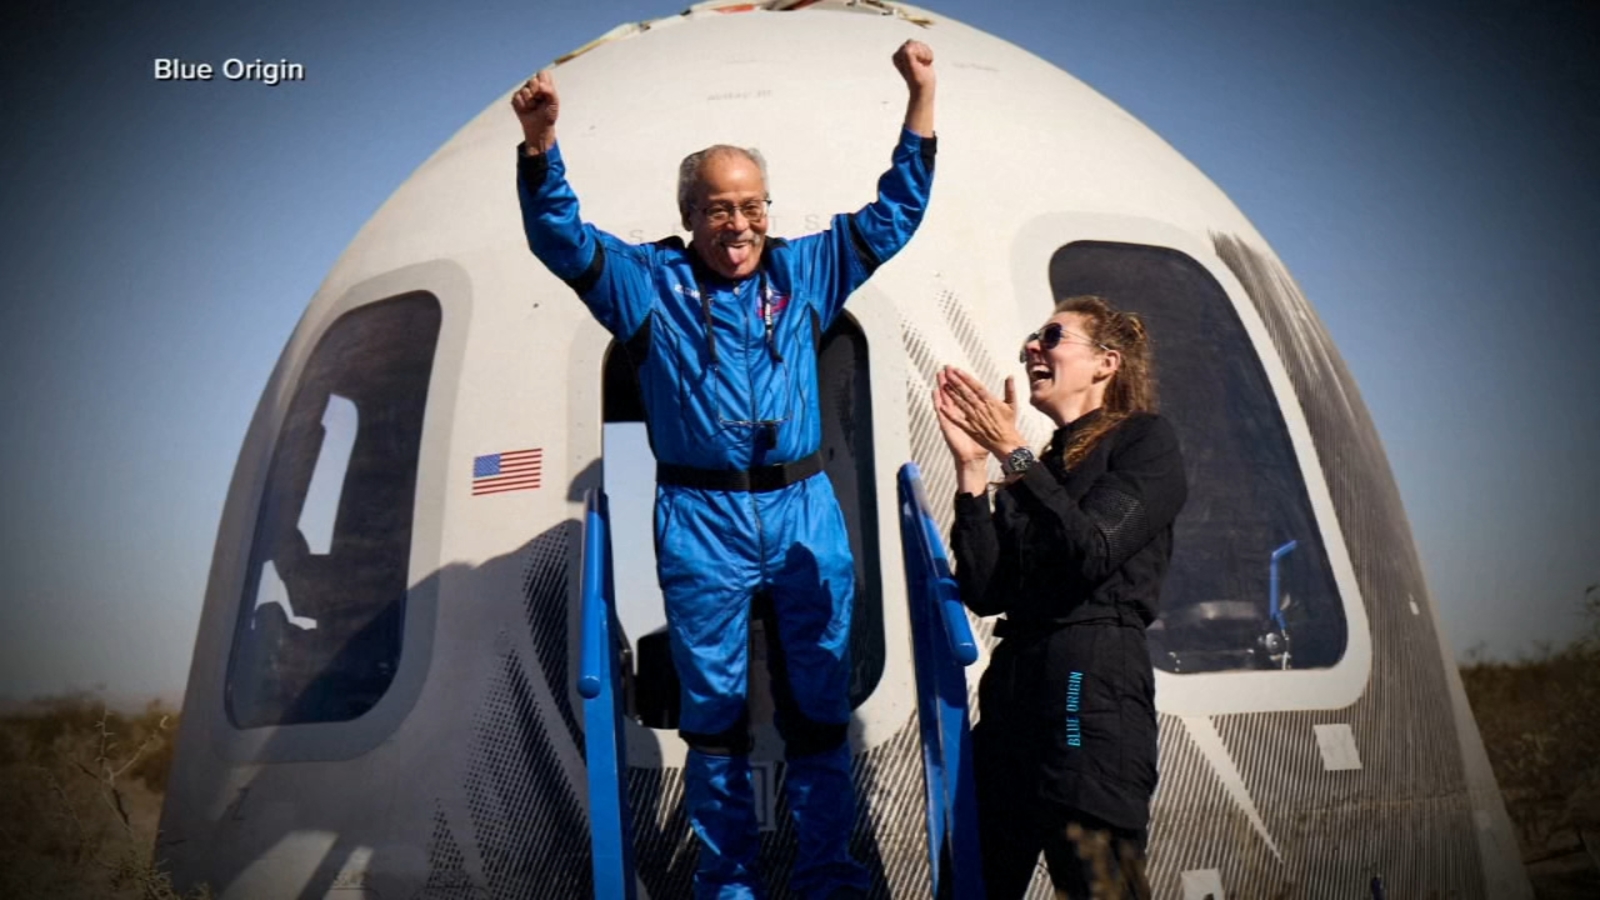 Ed Dwight, America’s first Black astronaut candidate, finally goes to space 60 years later on Blue Origin rocket [Video]